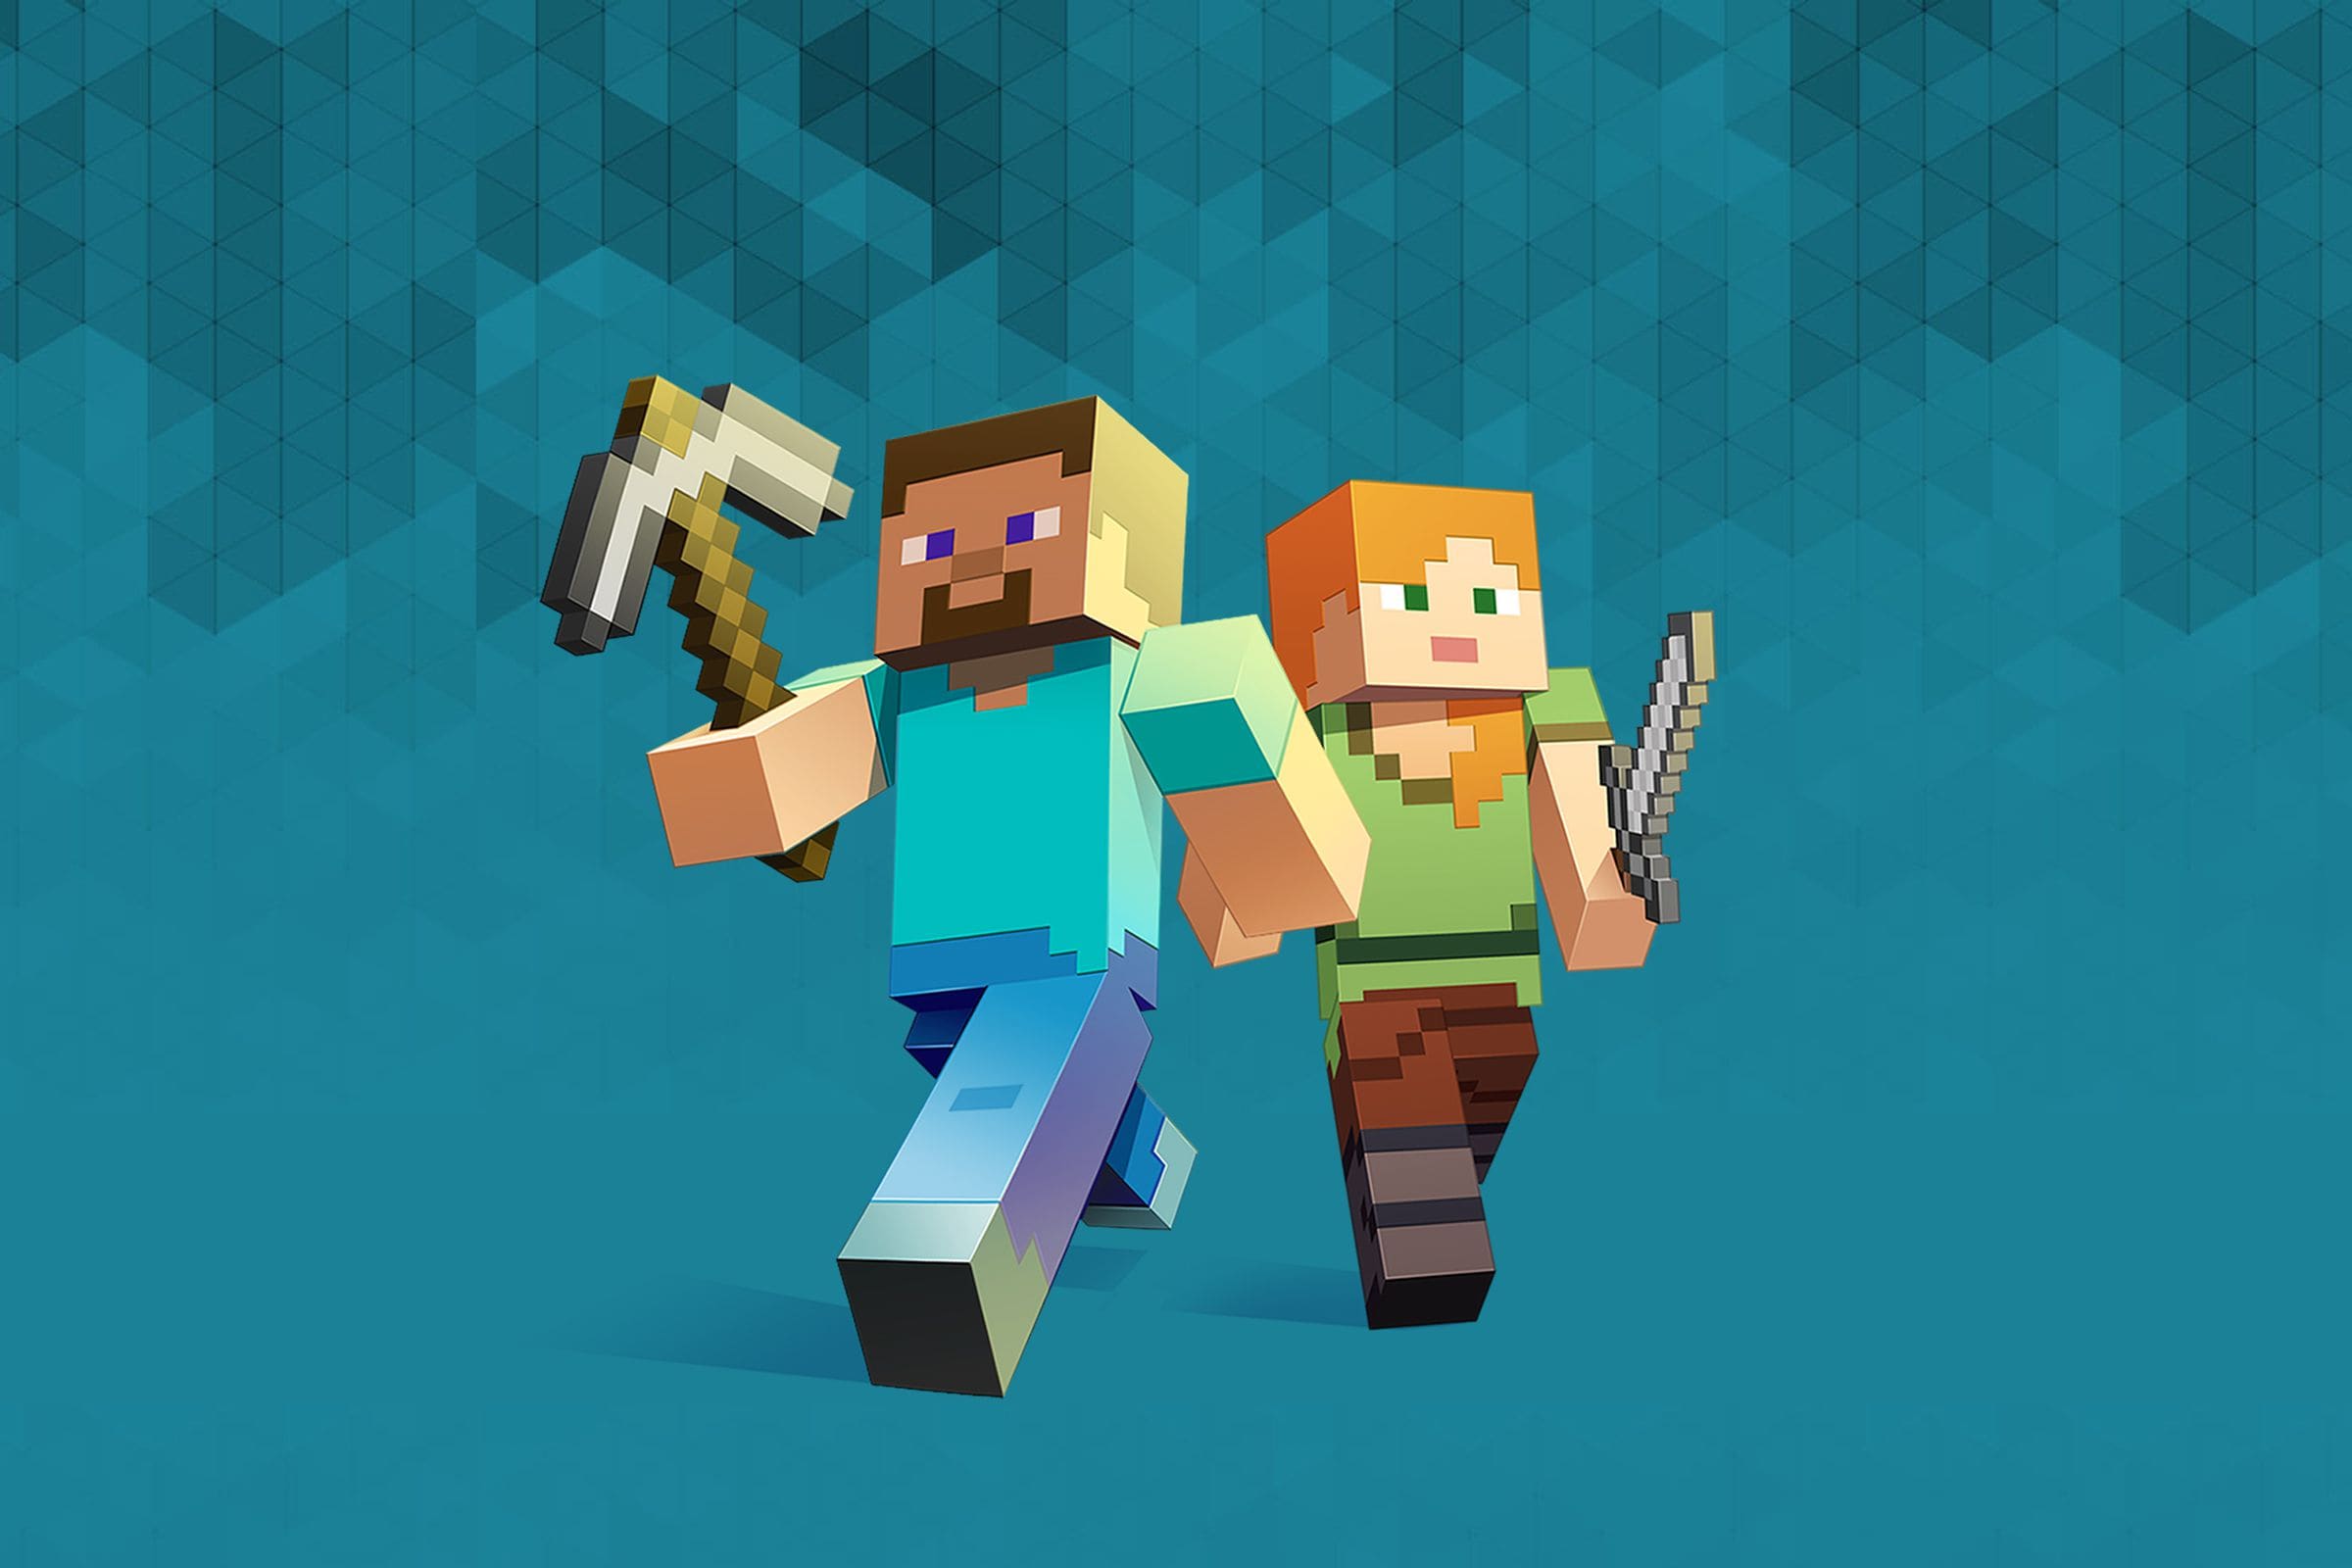 Thinking of returning to Minecraft? Here's what you need to know